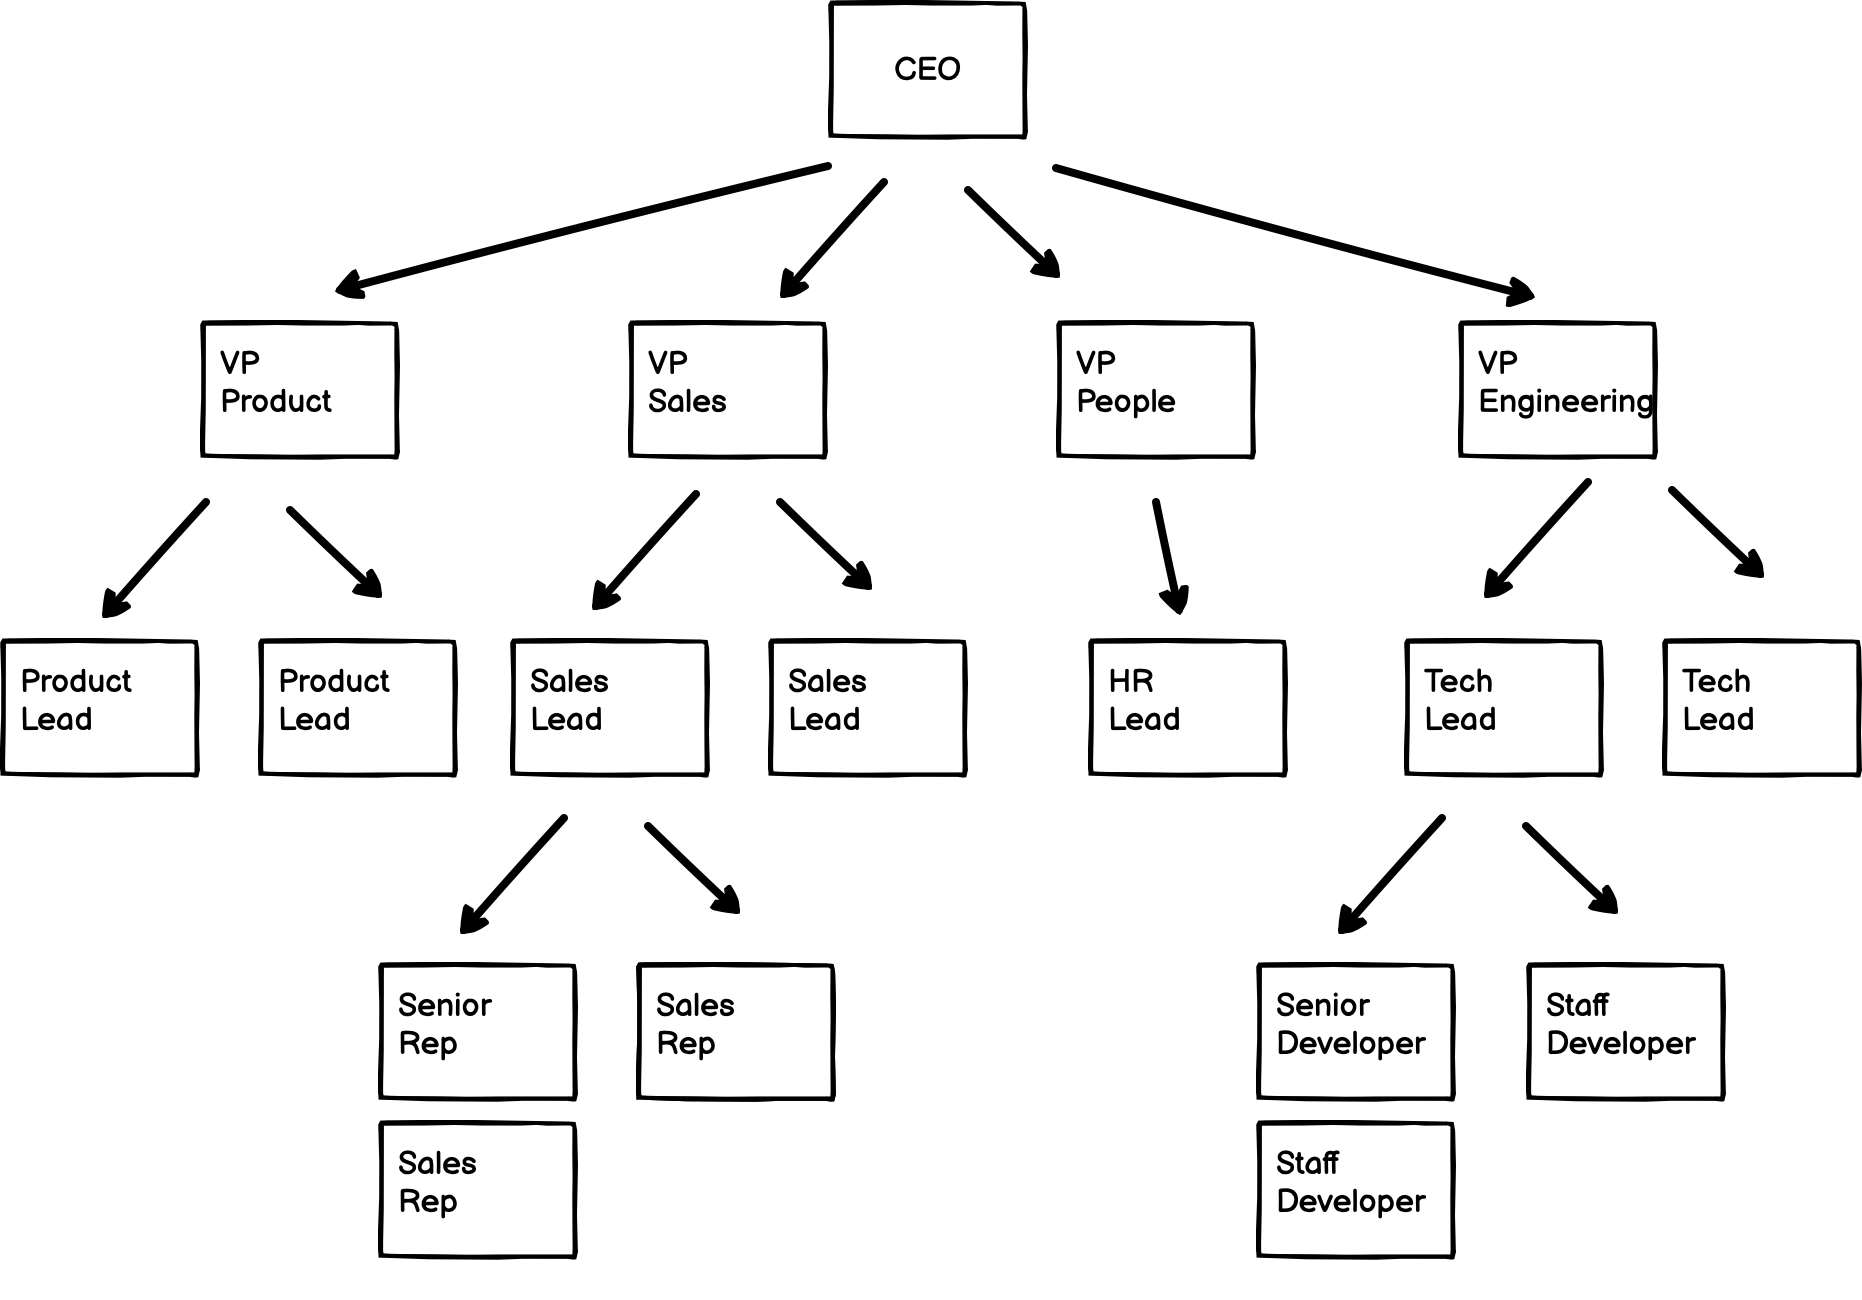 hierarchical org chart with ceo at the top and reports shown below